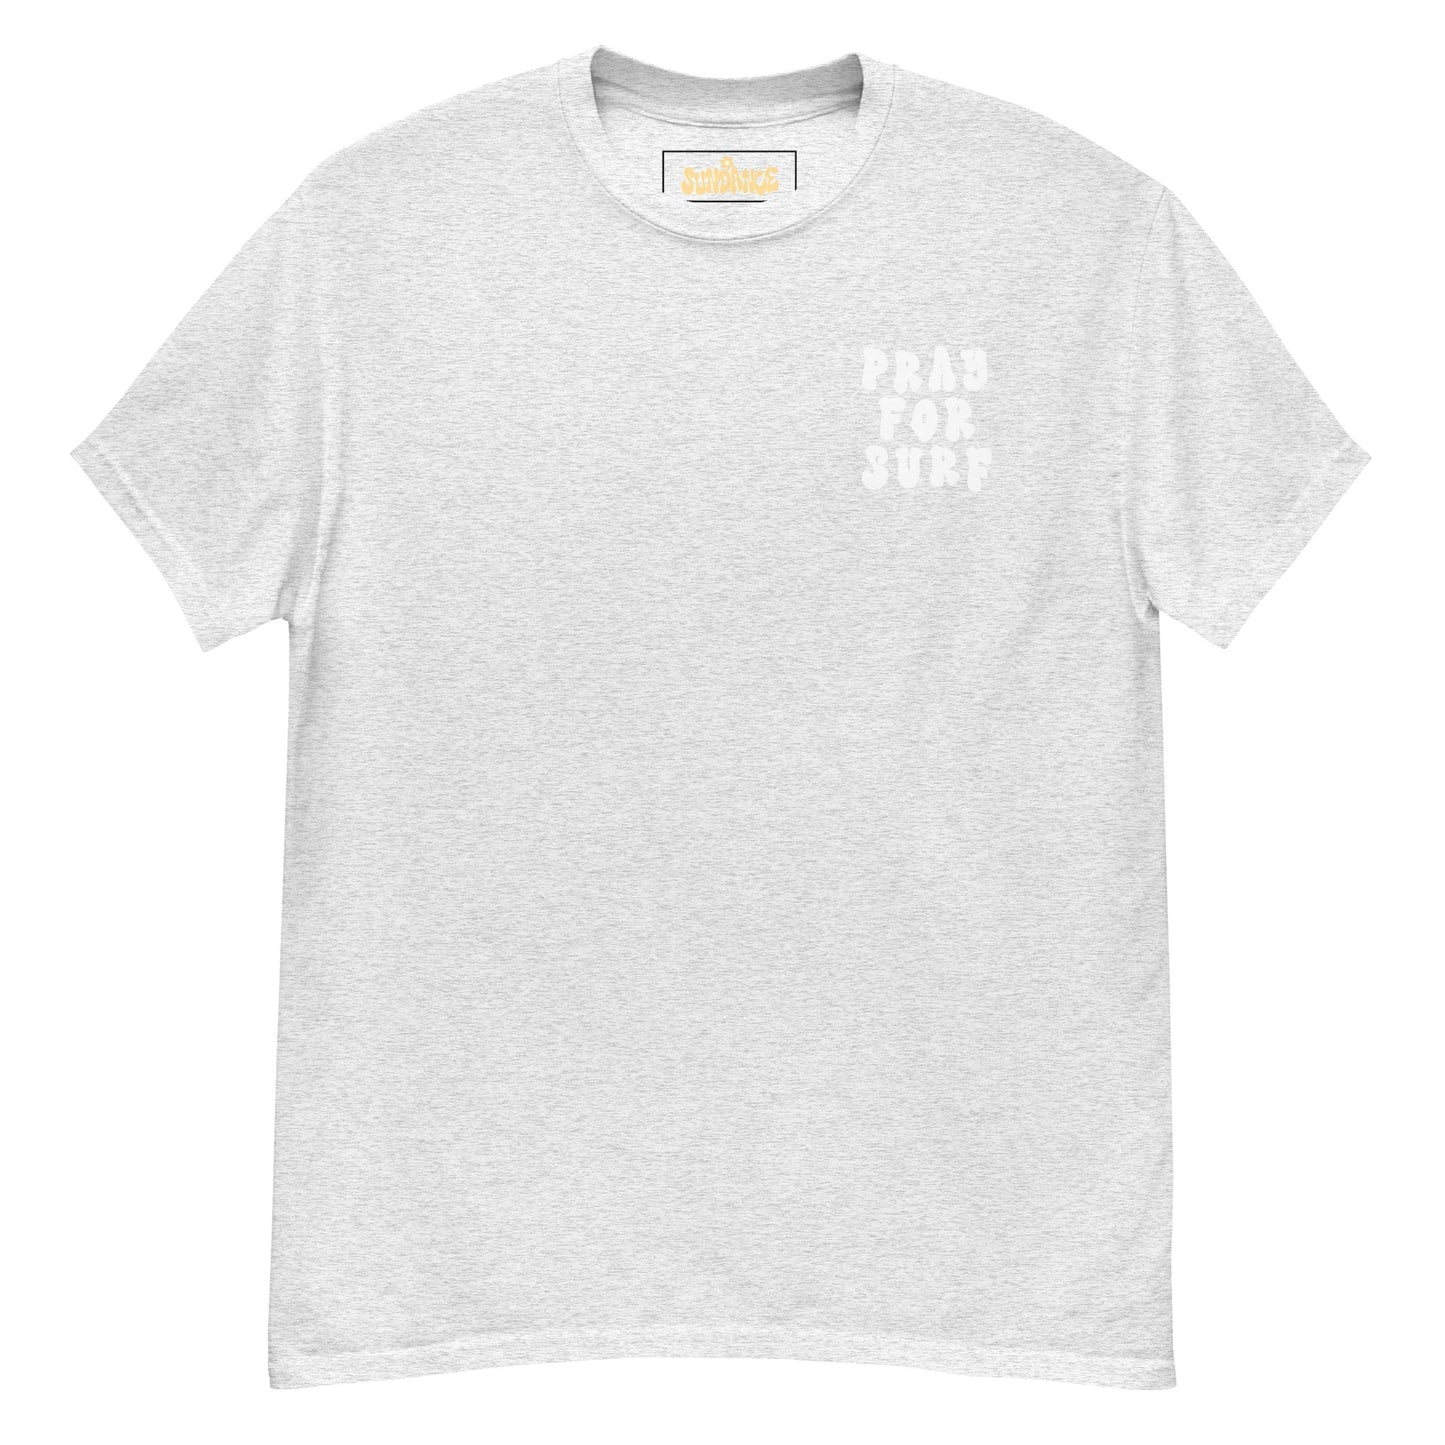 Pray For Surf Tee